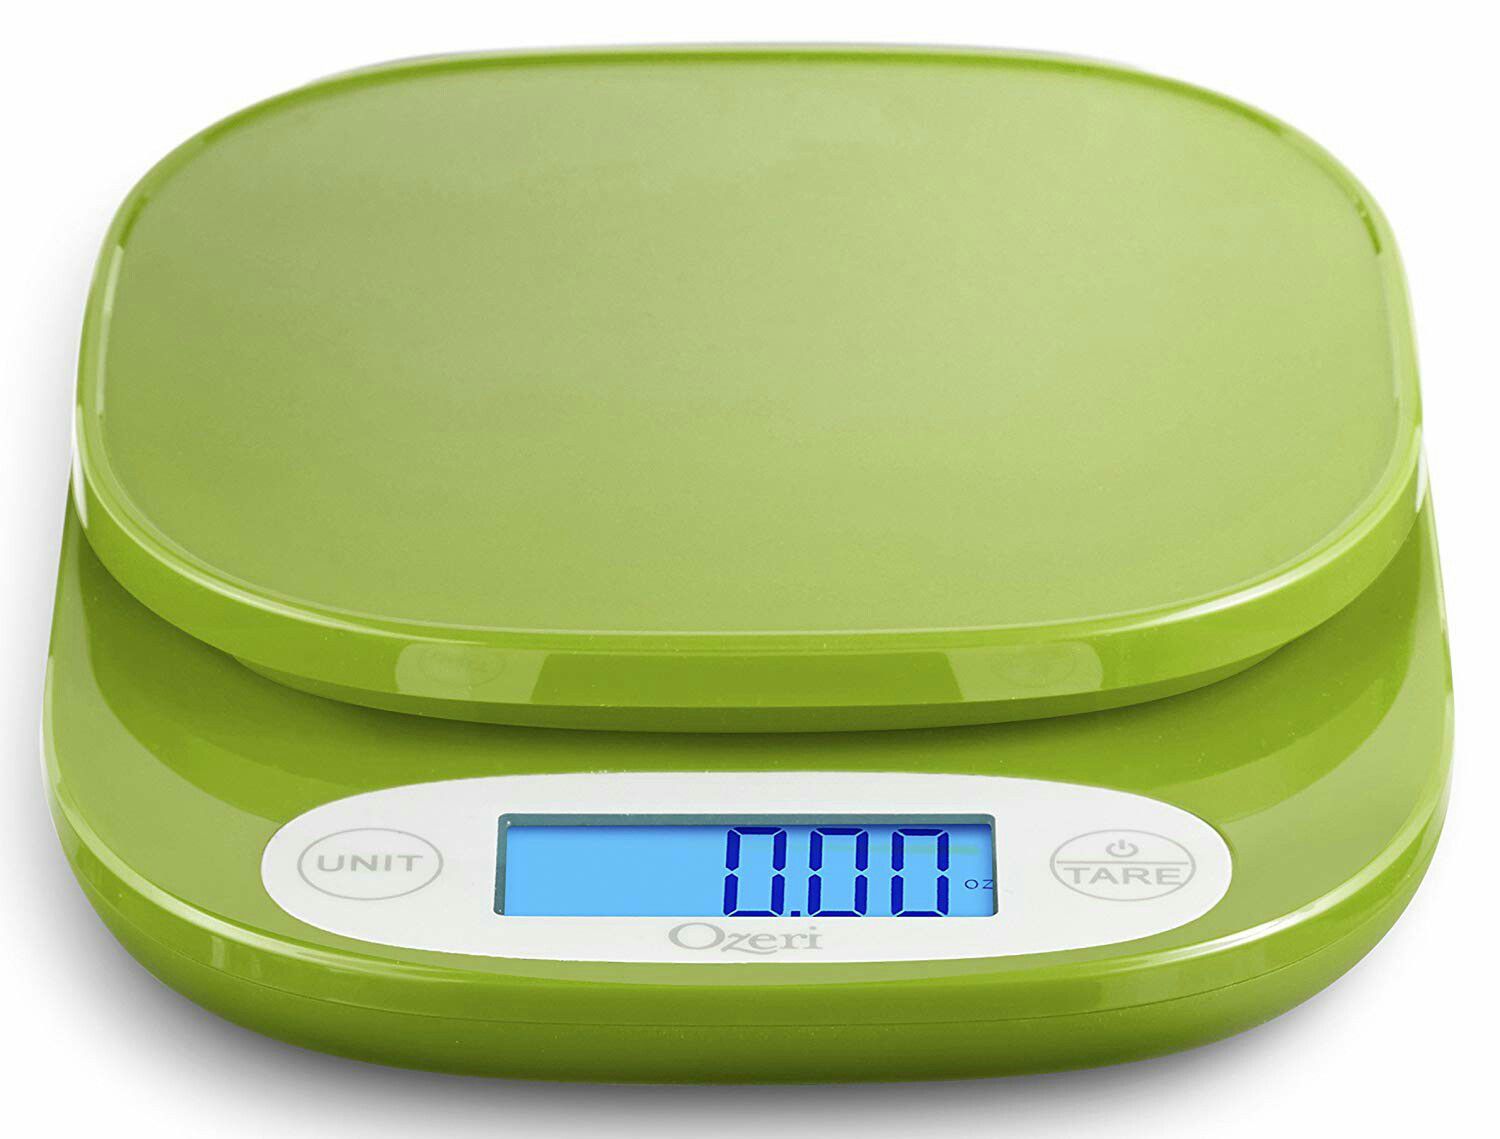 Ozeri ZK420 Garden and Kitchen Scale, with 0.5 g (0.01 oz) Precision Weighing Technology, in Greenery